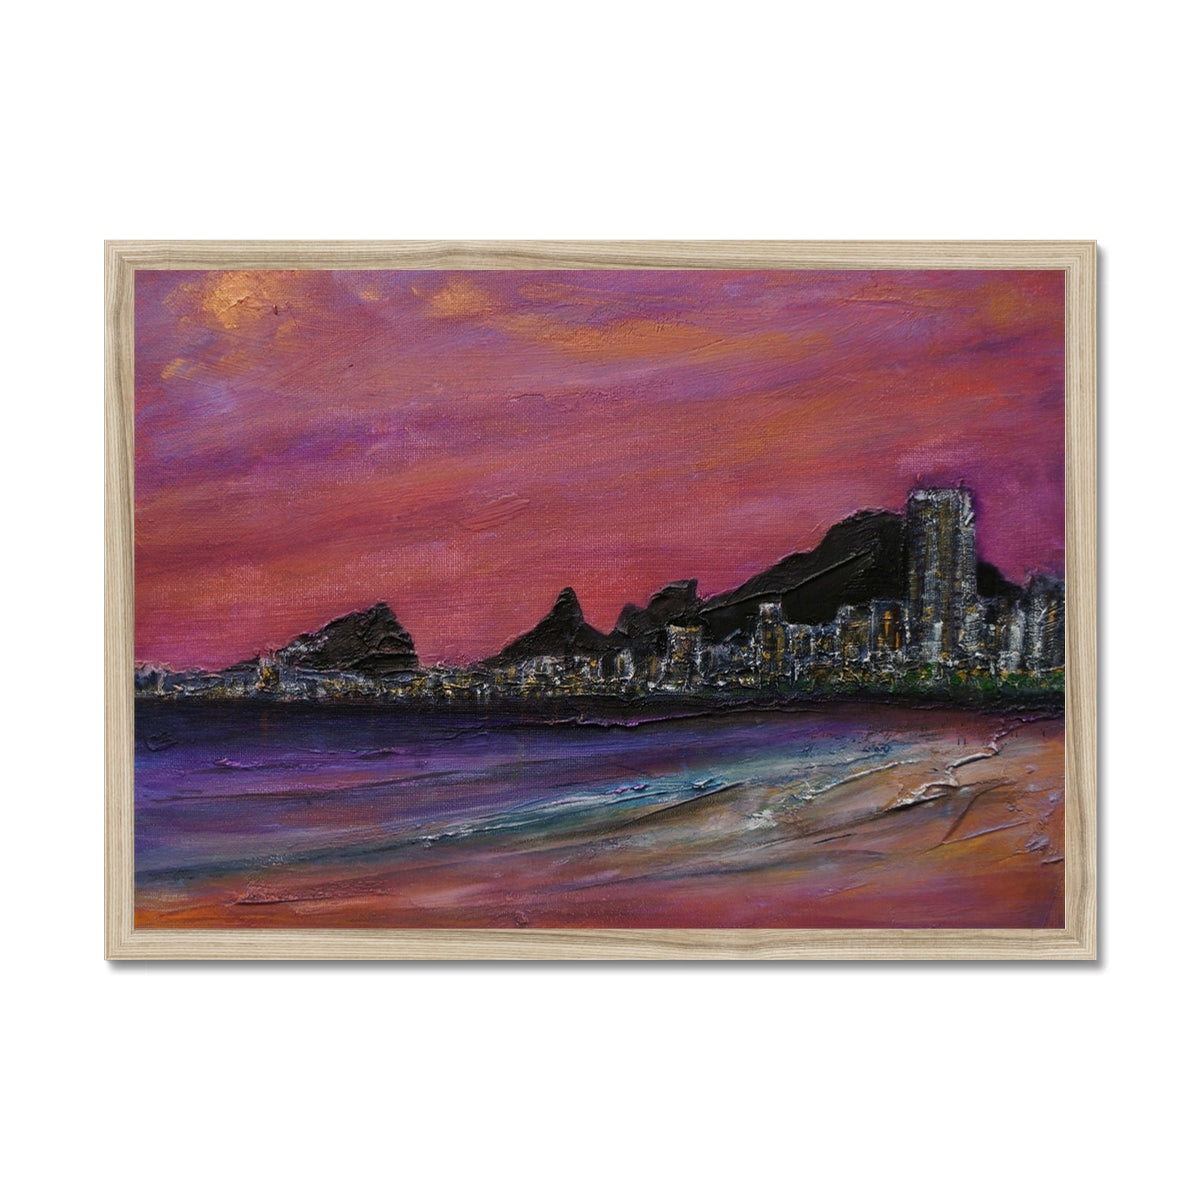 Copacabana Beach Dusk Painting | Framed Prints From Scotland-Framed Prints-World Art Gallery-A2 Landscape-Natural Frame-Paintings, Prints, Homeware, Art Gifts From Scotland By Scottish Artist Kevin Hunter